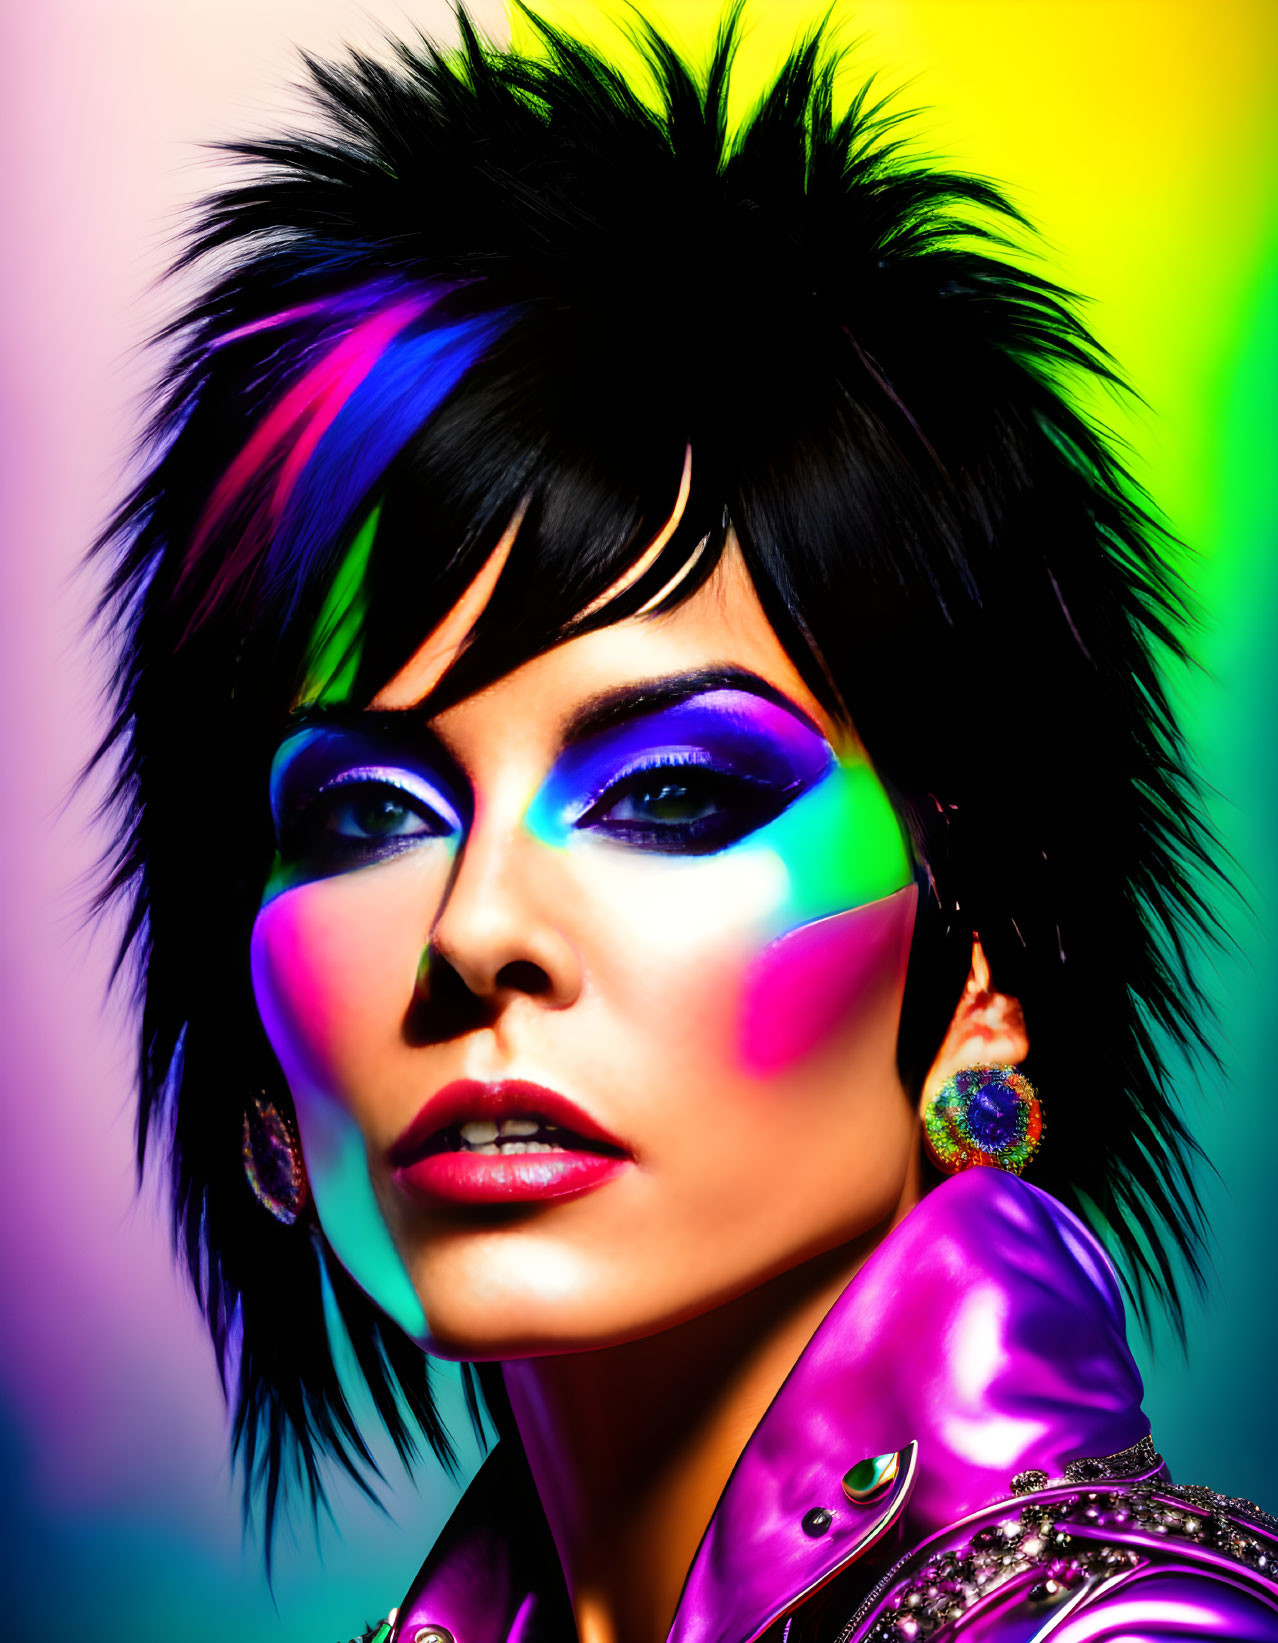 Colorful background woman with vibrant makeup and spiky hair in shiny purple jacket